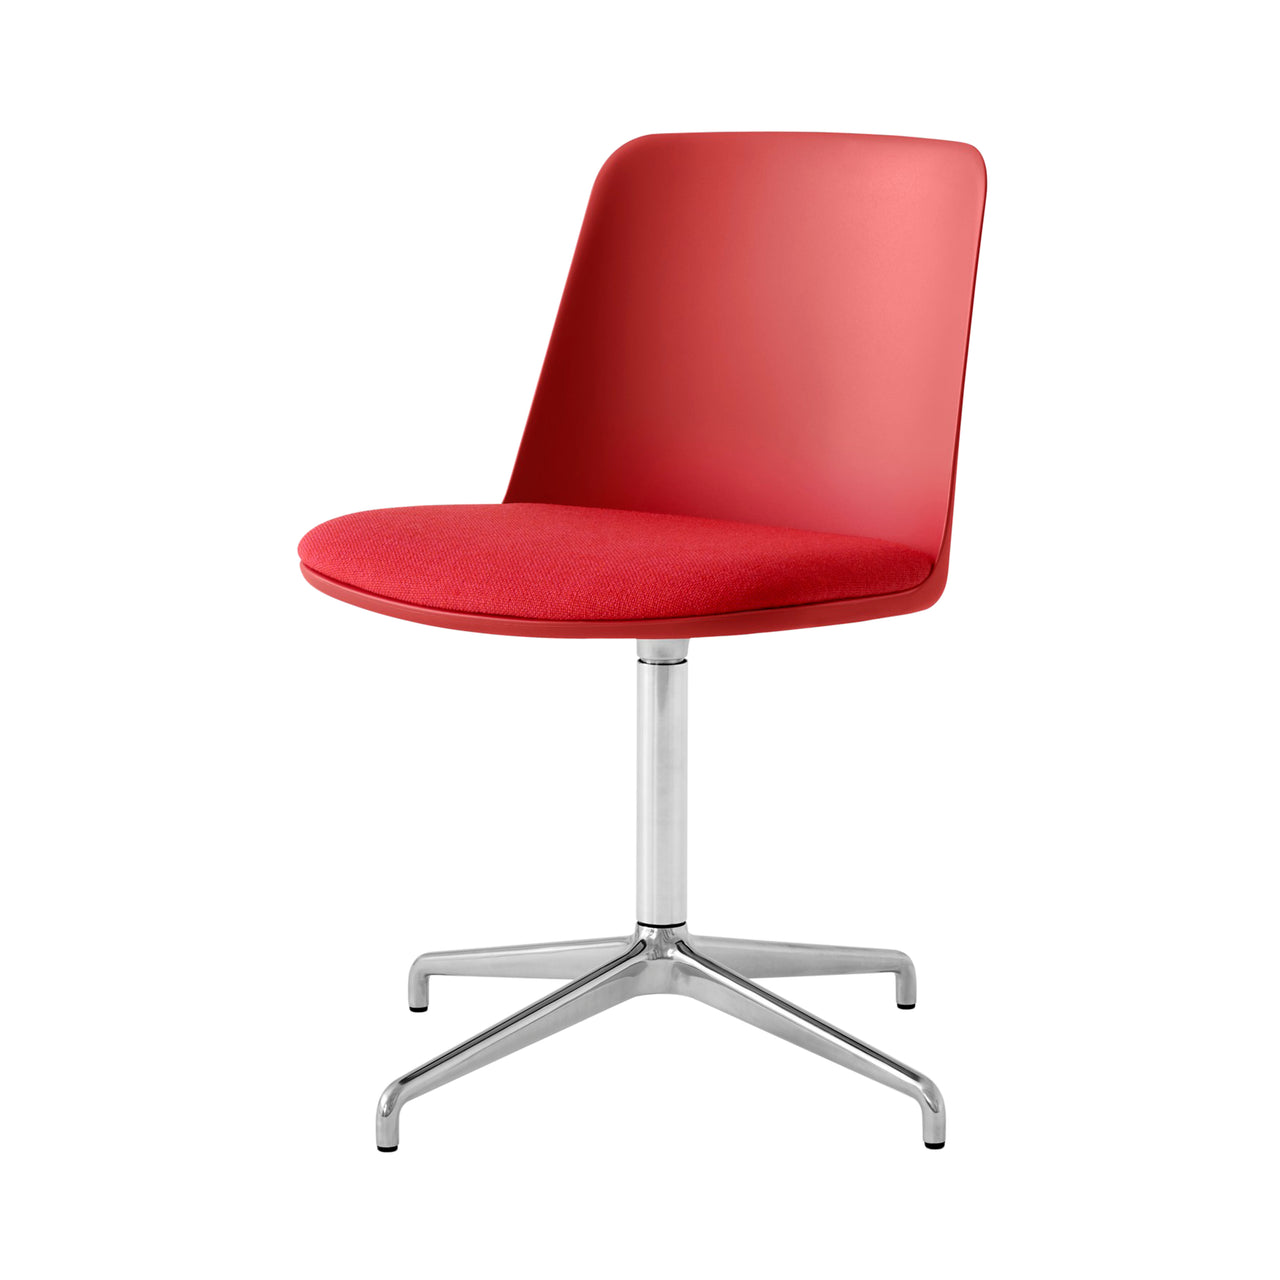 Rely Chair HW17: Polished Aluminum + Vermilion Red